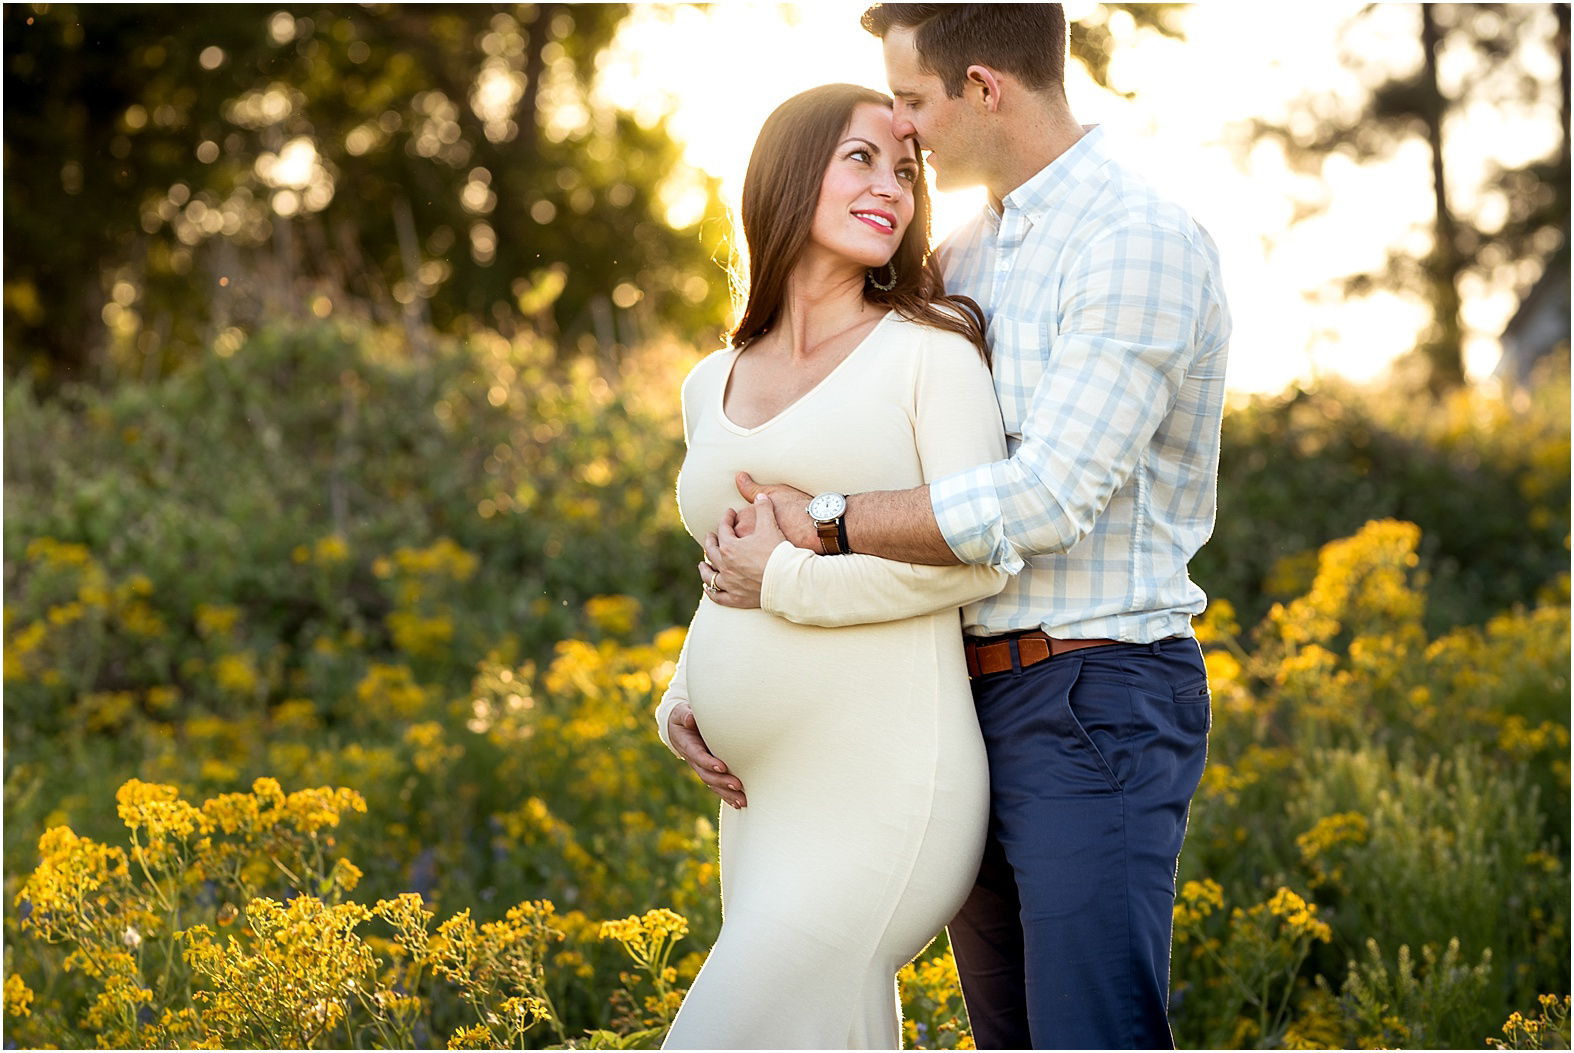 Houston Outdoor Maternity Session Featuring Mossy Trees and Texas